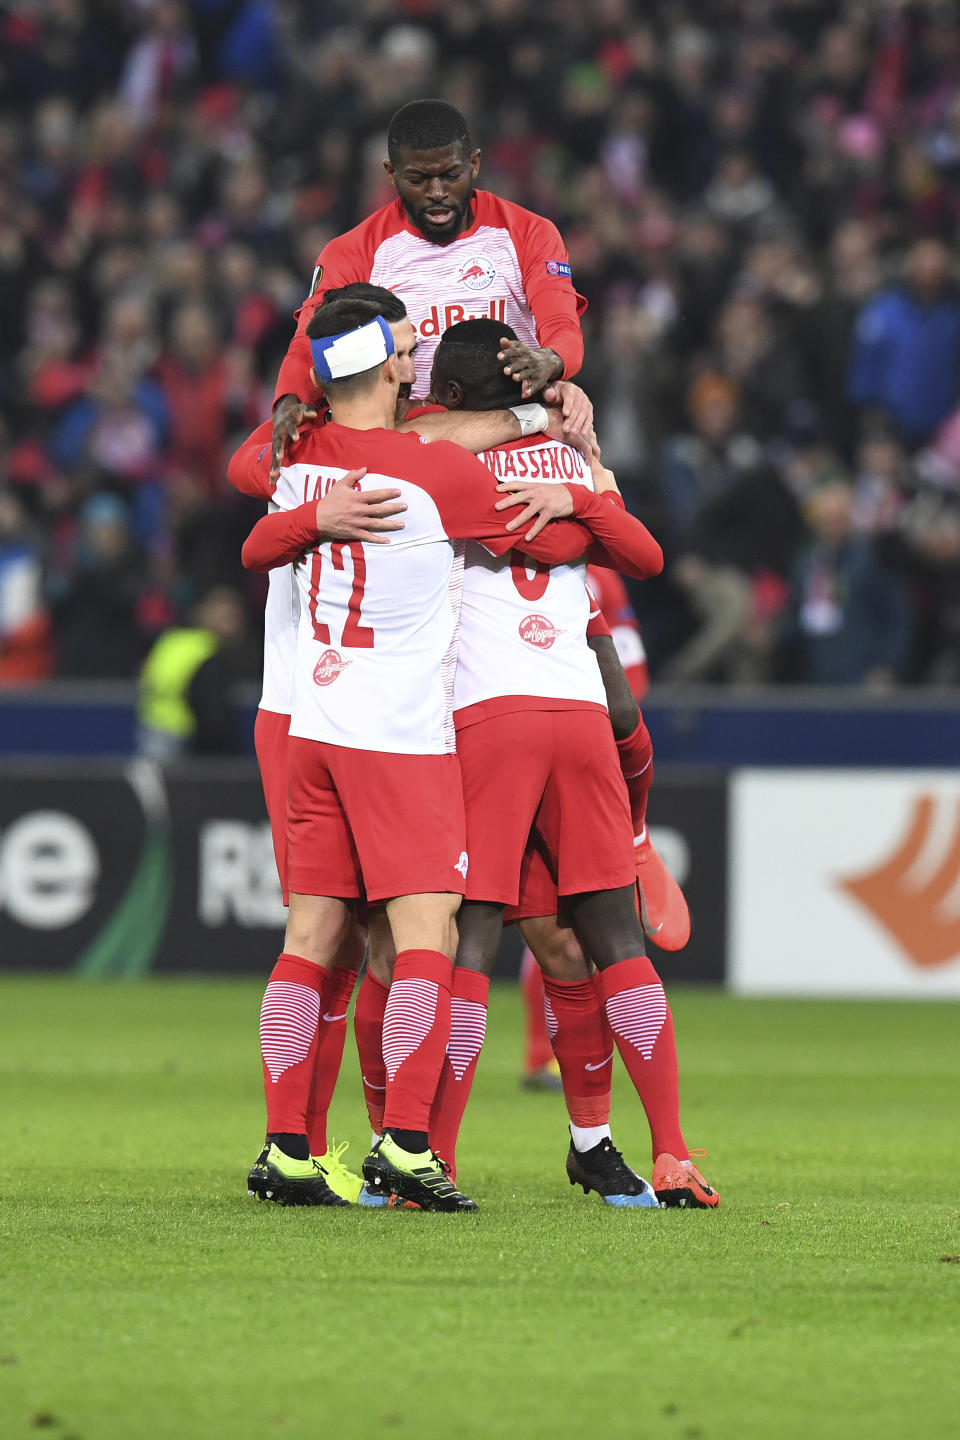 Salzburg's players celebrate after scoring during the Europa League round of 32 second leg soccer match between FC Salzburg and Club Brugge in the Arena in Salzburg, Austria, on Thursday, Feb. 21, 2019. (AP Photo/Kerstin Joensson)